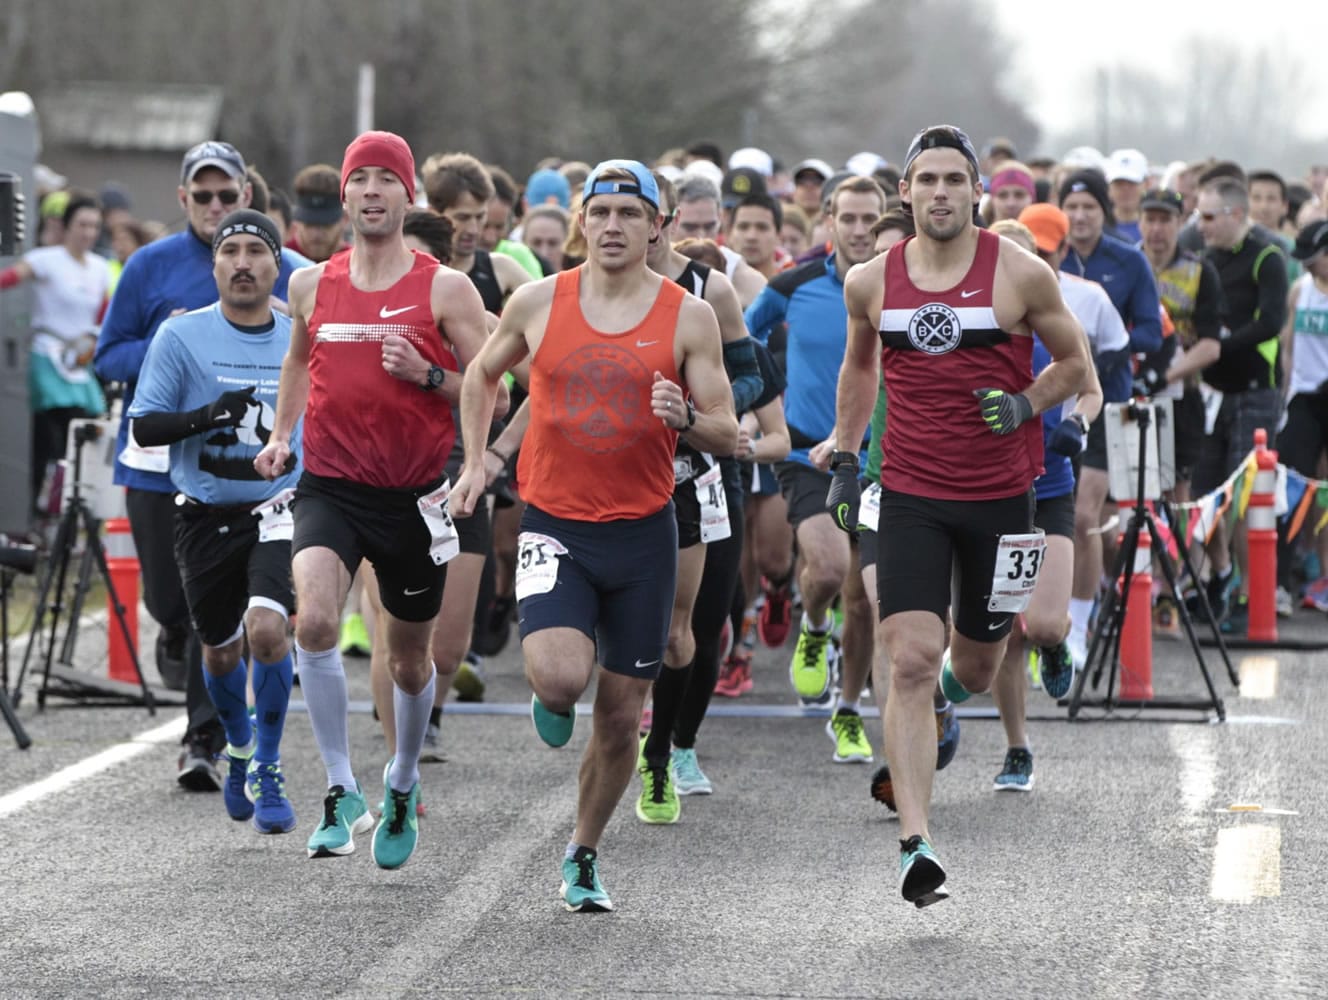 Left to right, Peter Bromka, Patrick Reaves and Chris Platano at the start of the Vancouver Lake Half Marathon.